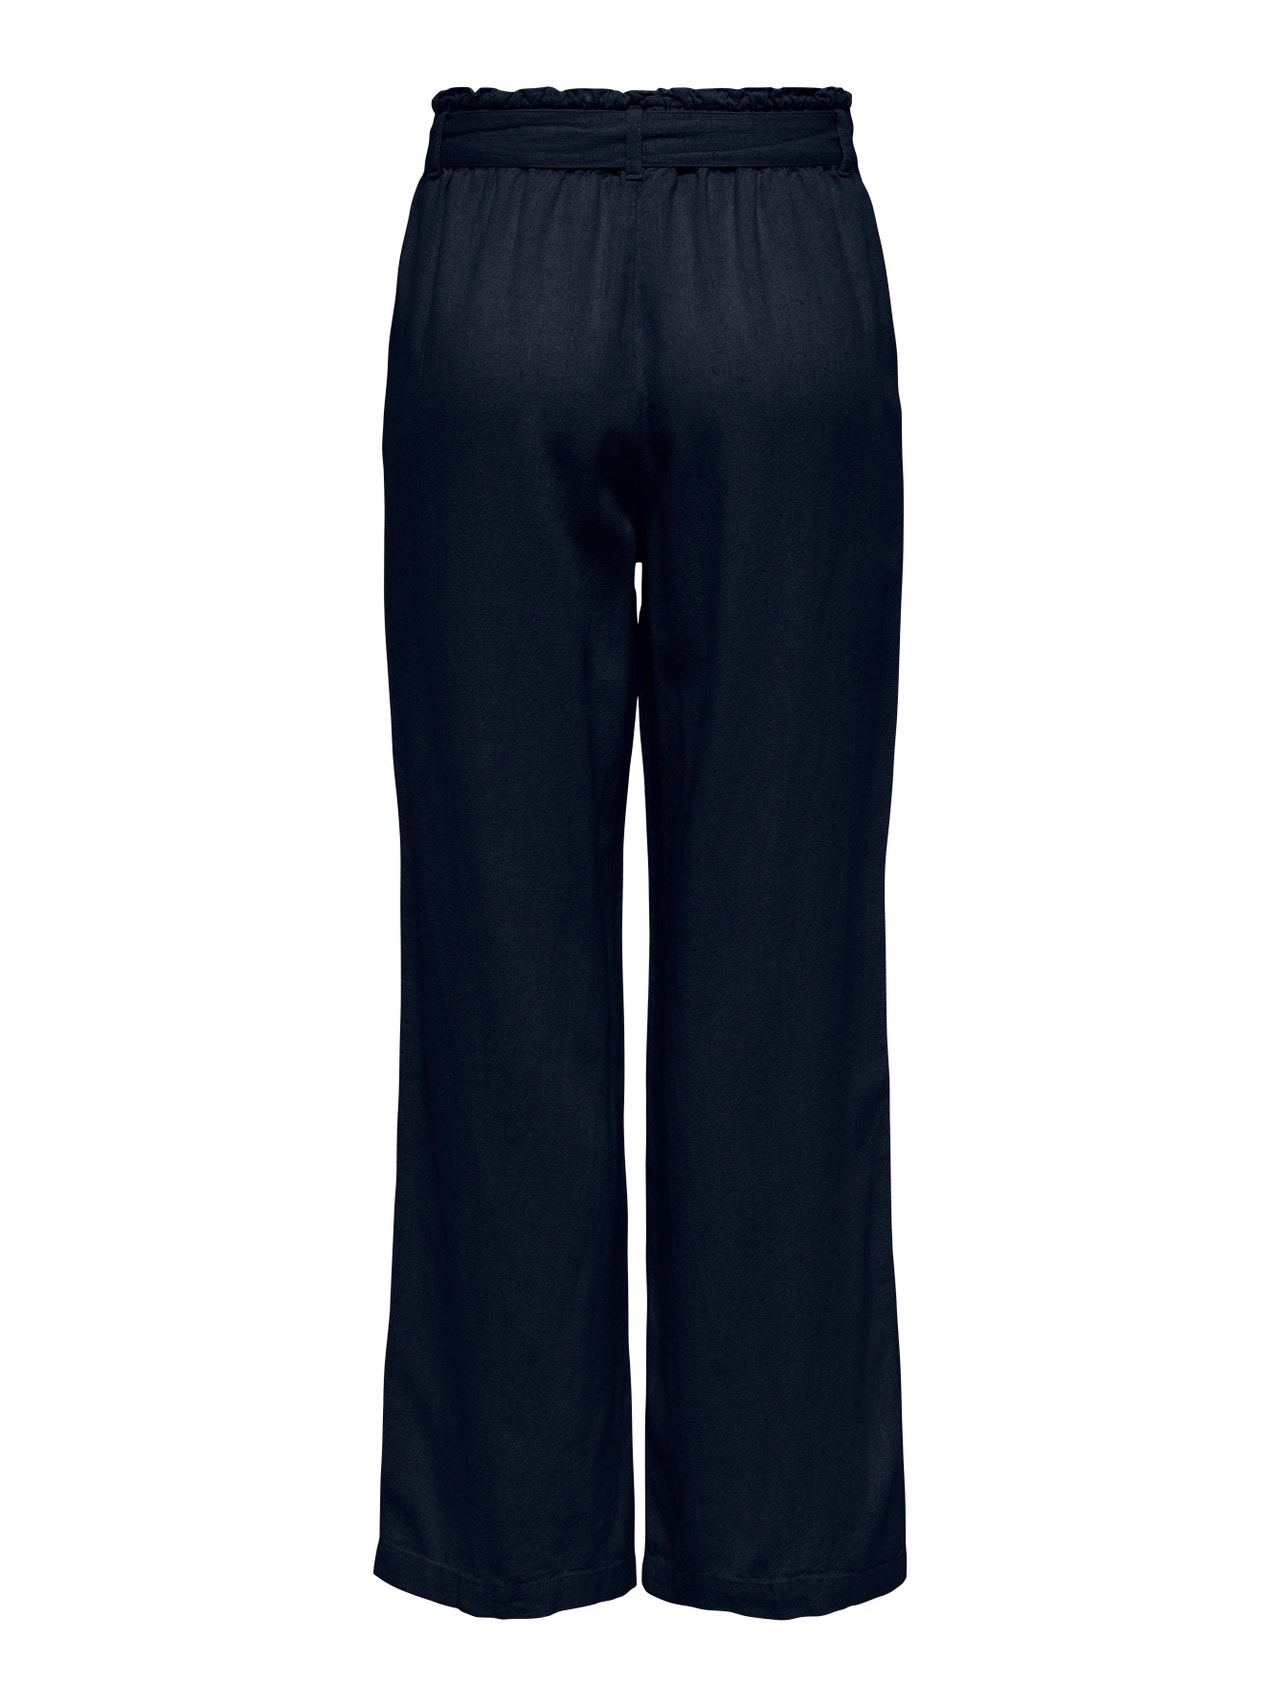 ONLY Loose Fit Mid waist Trousers -Sky Captain - 15254626